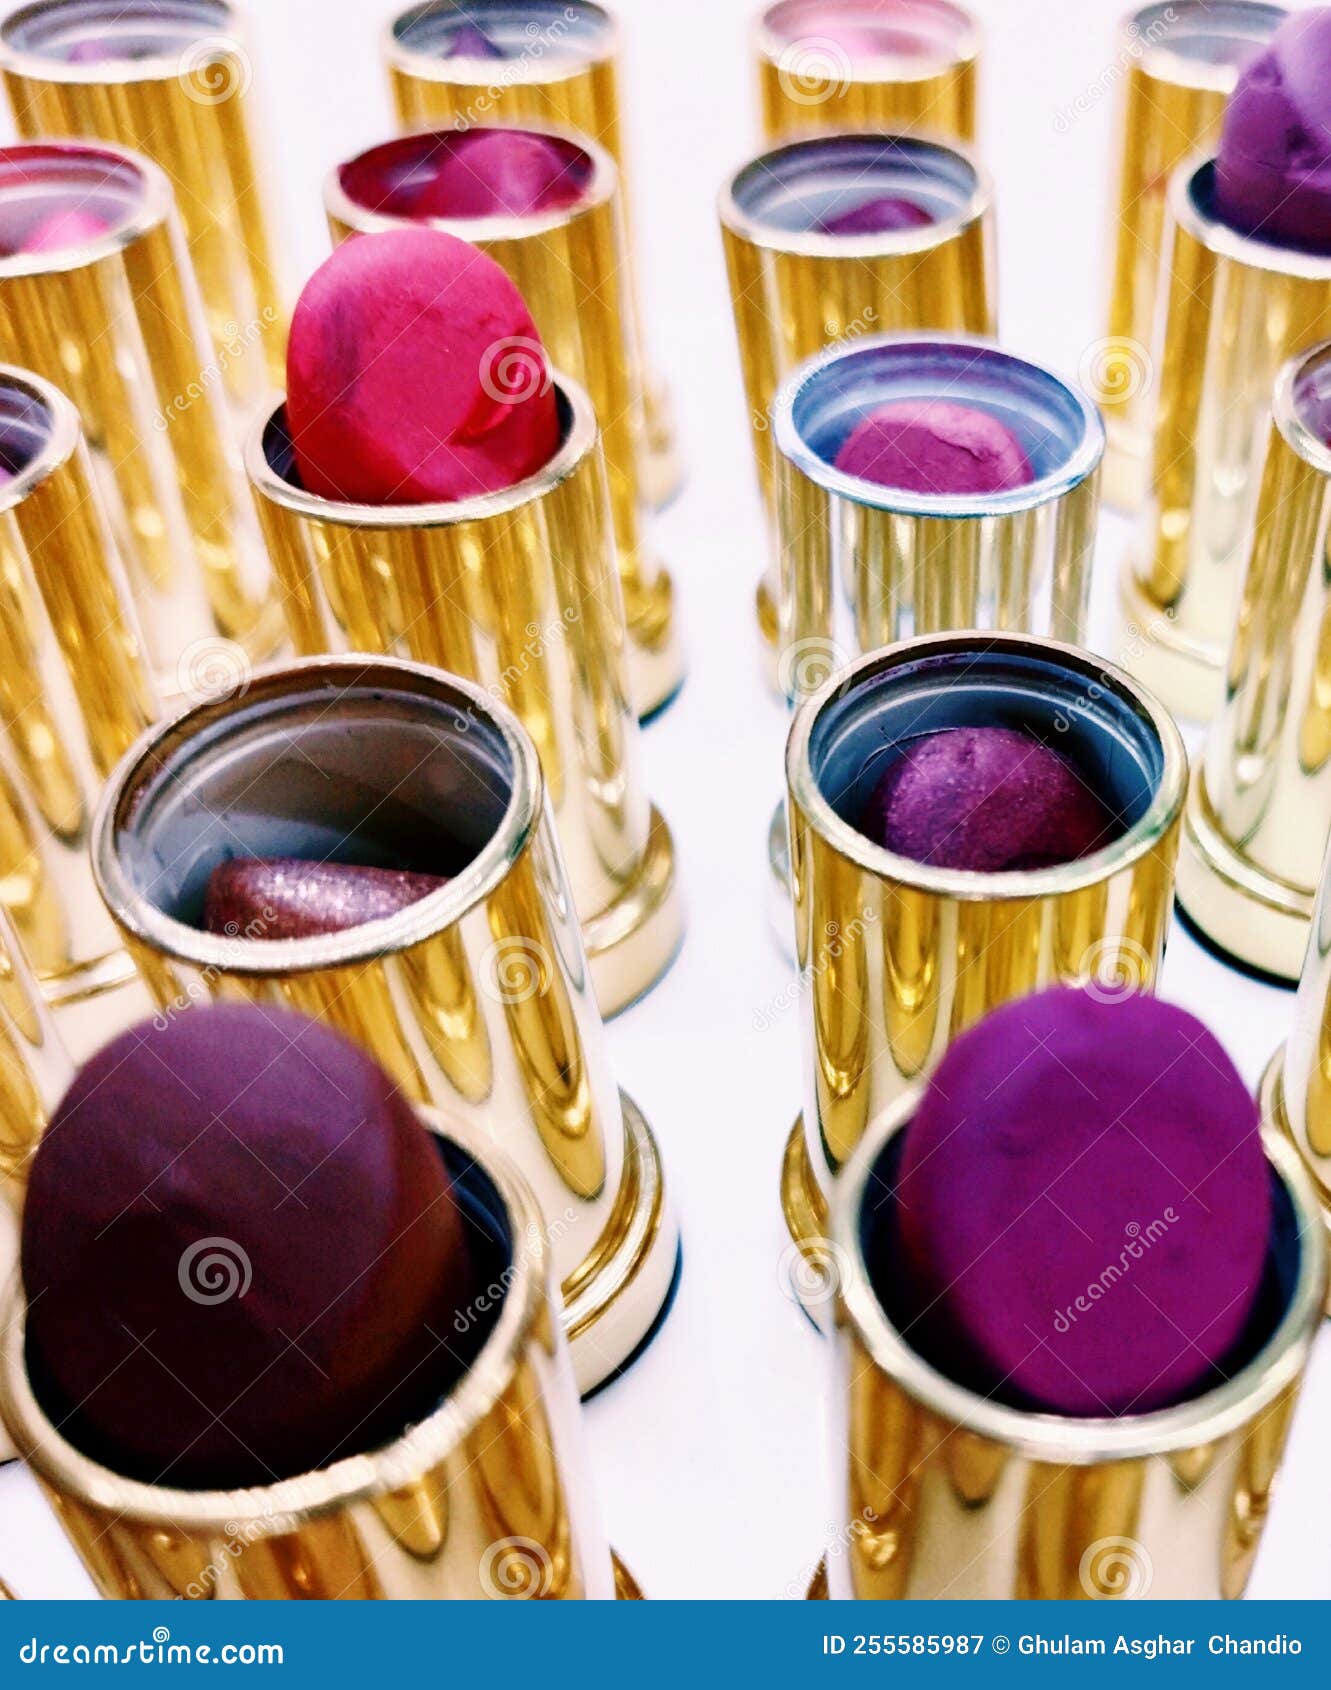 lipstick lippy make-up for the ladies red lips beauty fashion cosmetic product closeup view image photo